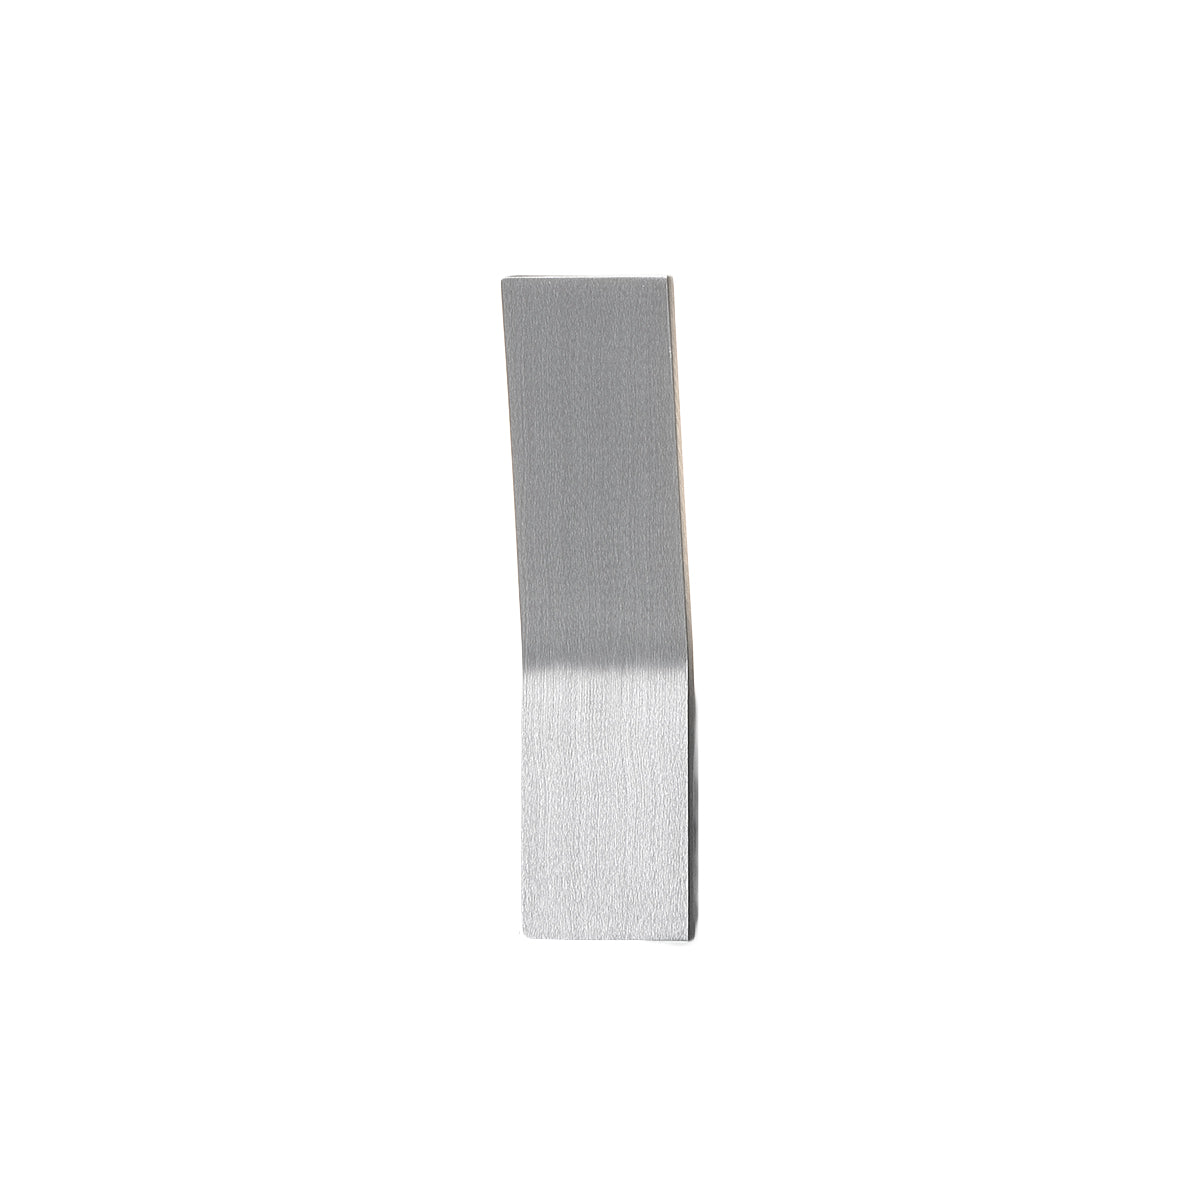 BLADE Sconce Aluminum INTEGRATED LED - WS-11511-AL | MODERN FORMS